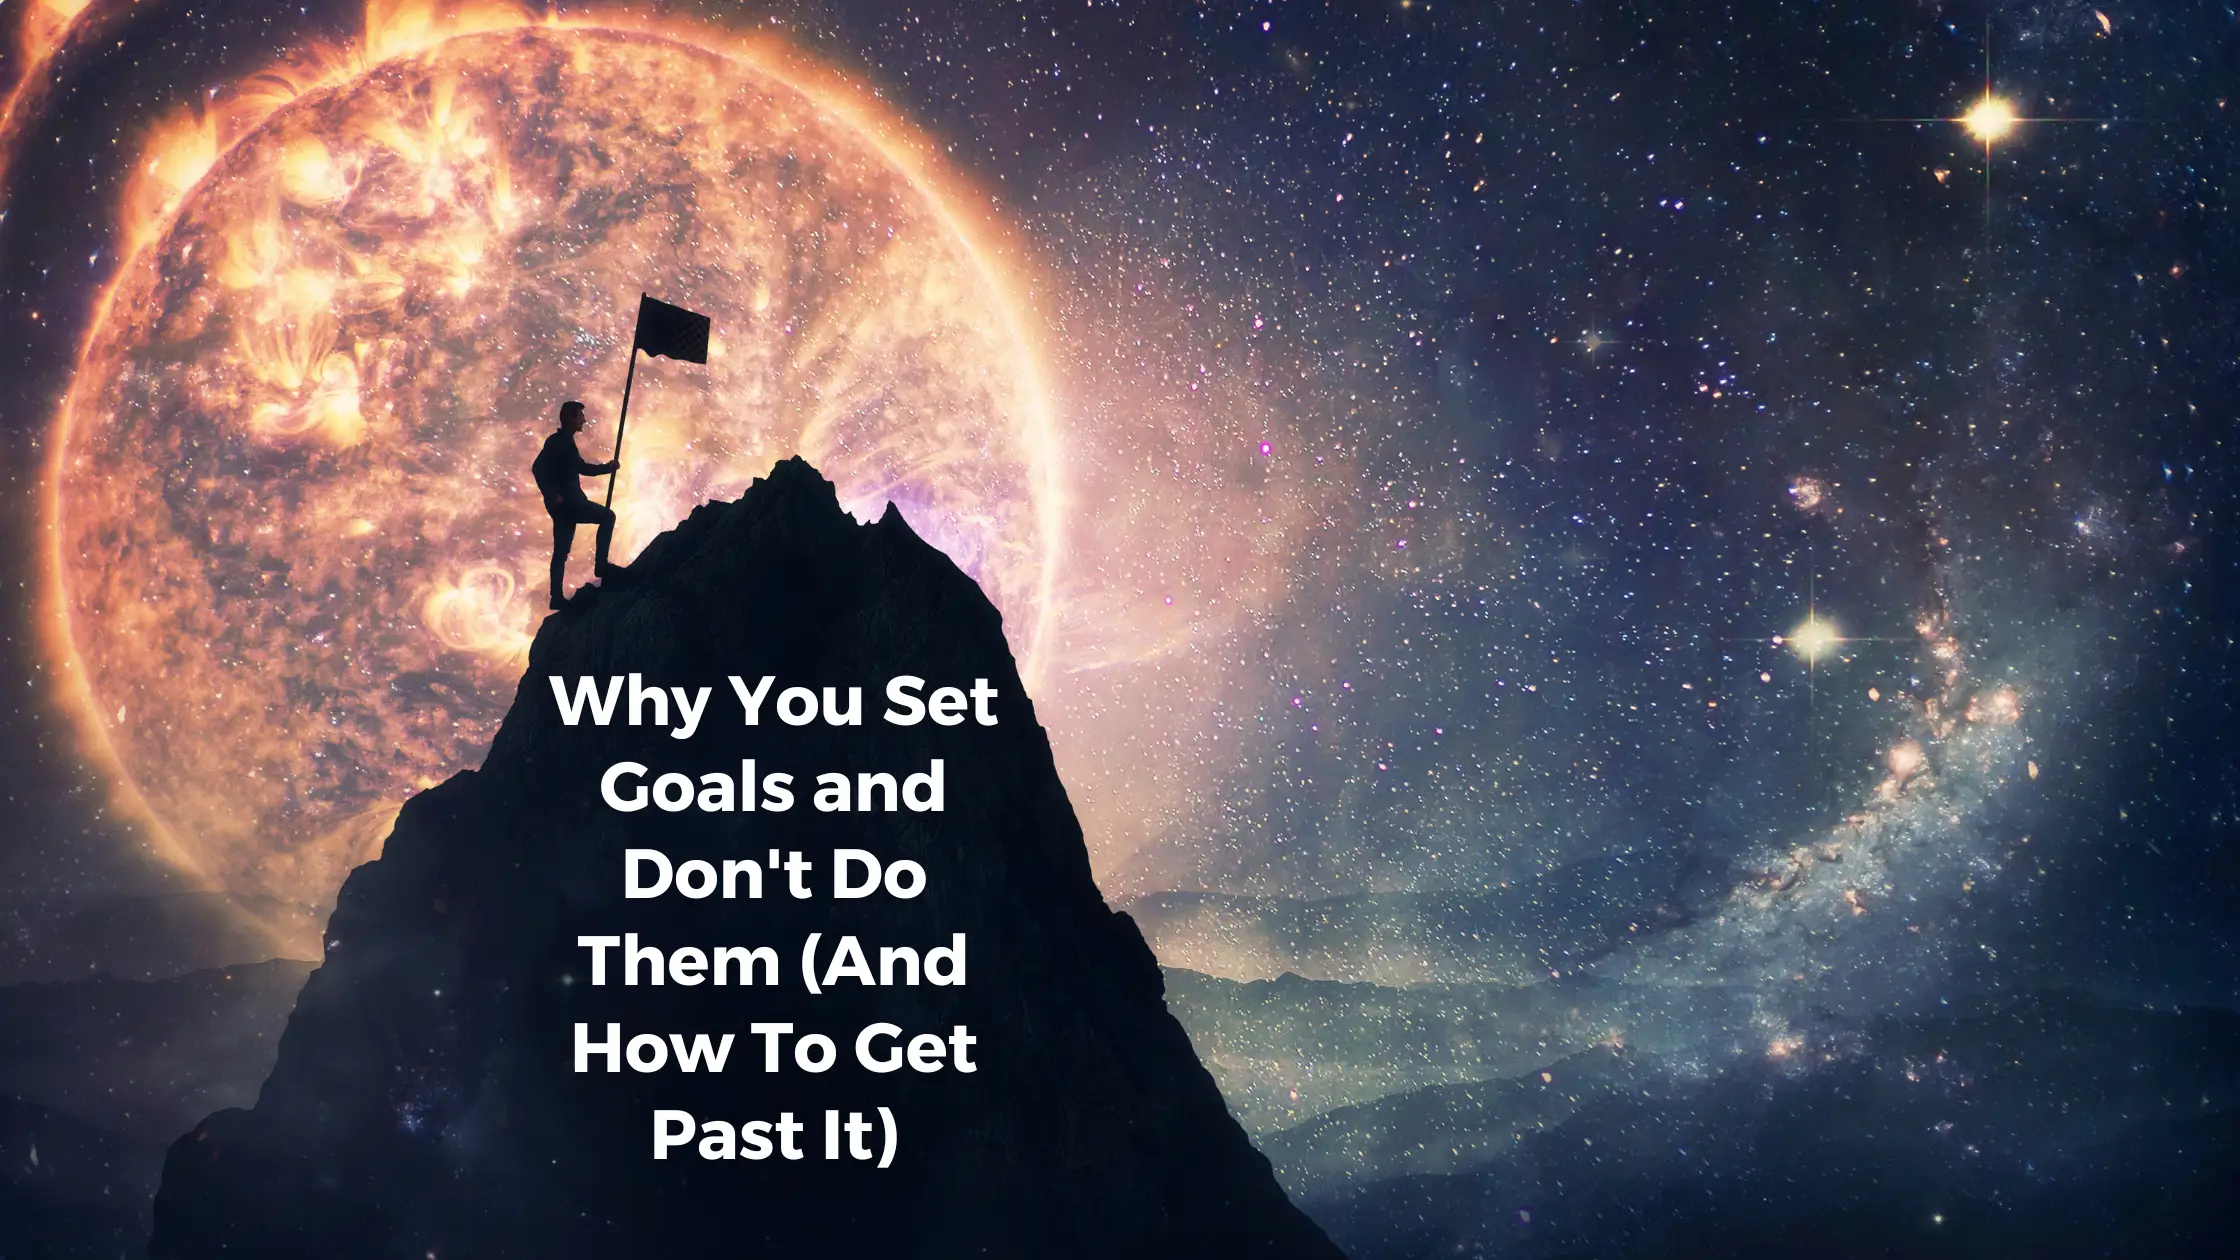 Why You Set Goals and Don’t Do Them (And How To Get Past It)